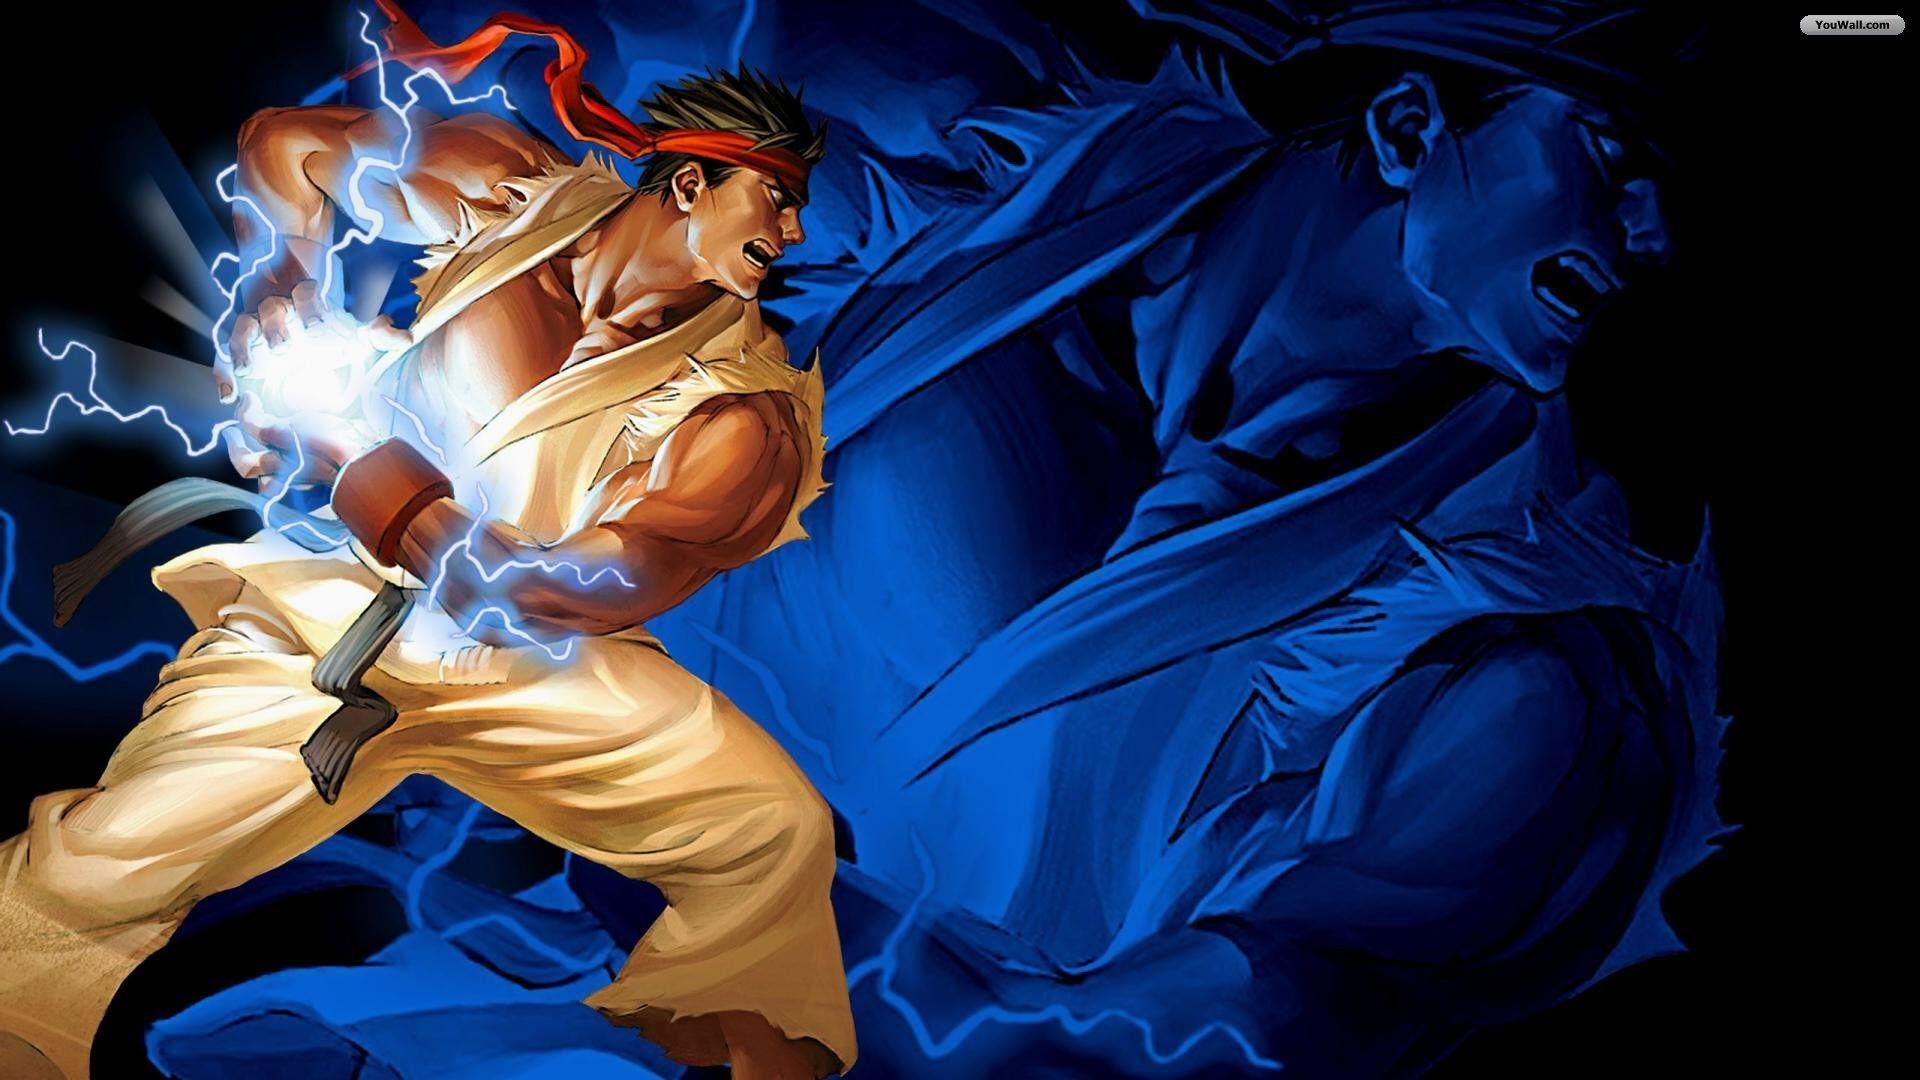 HDQ Street Fighter Image